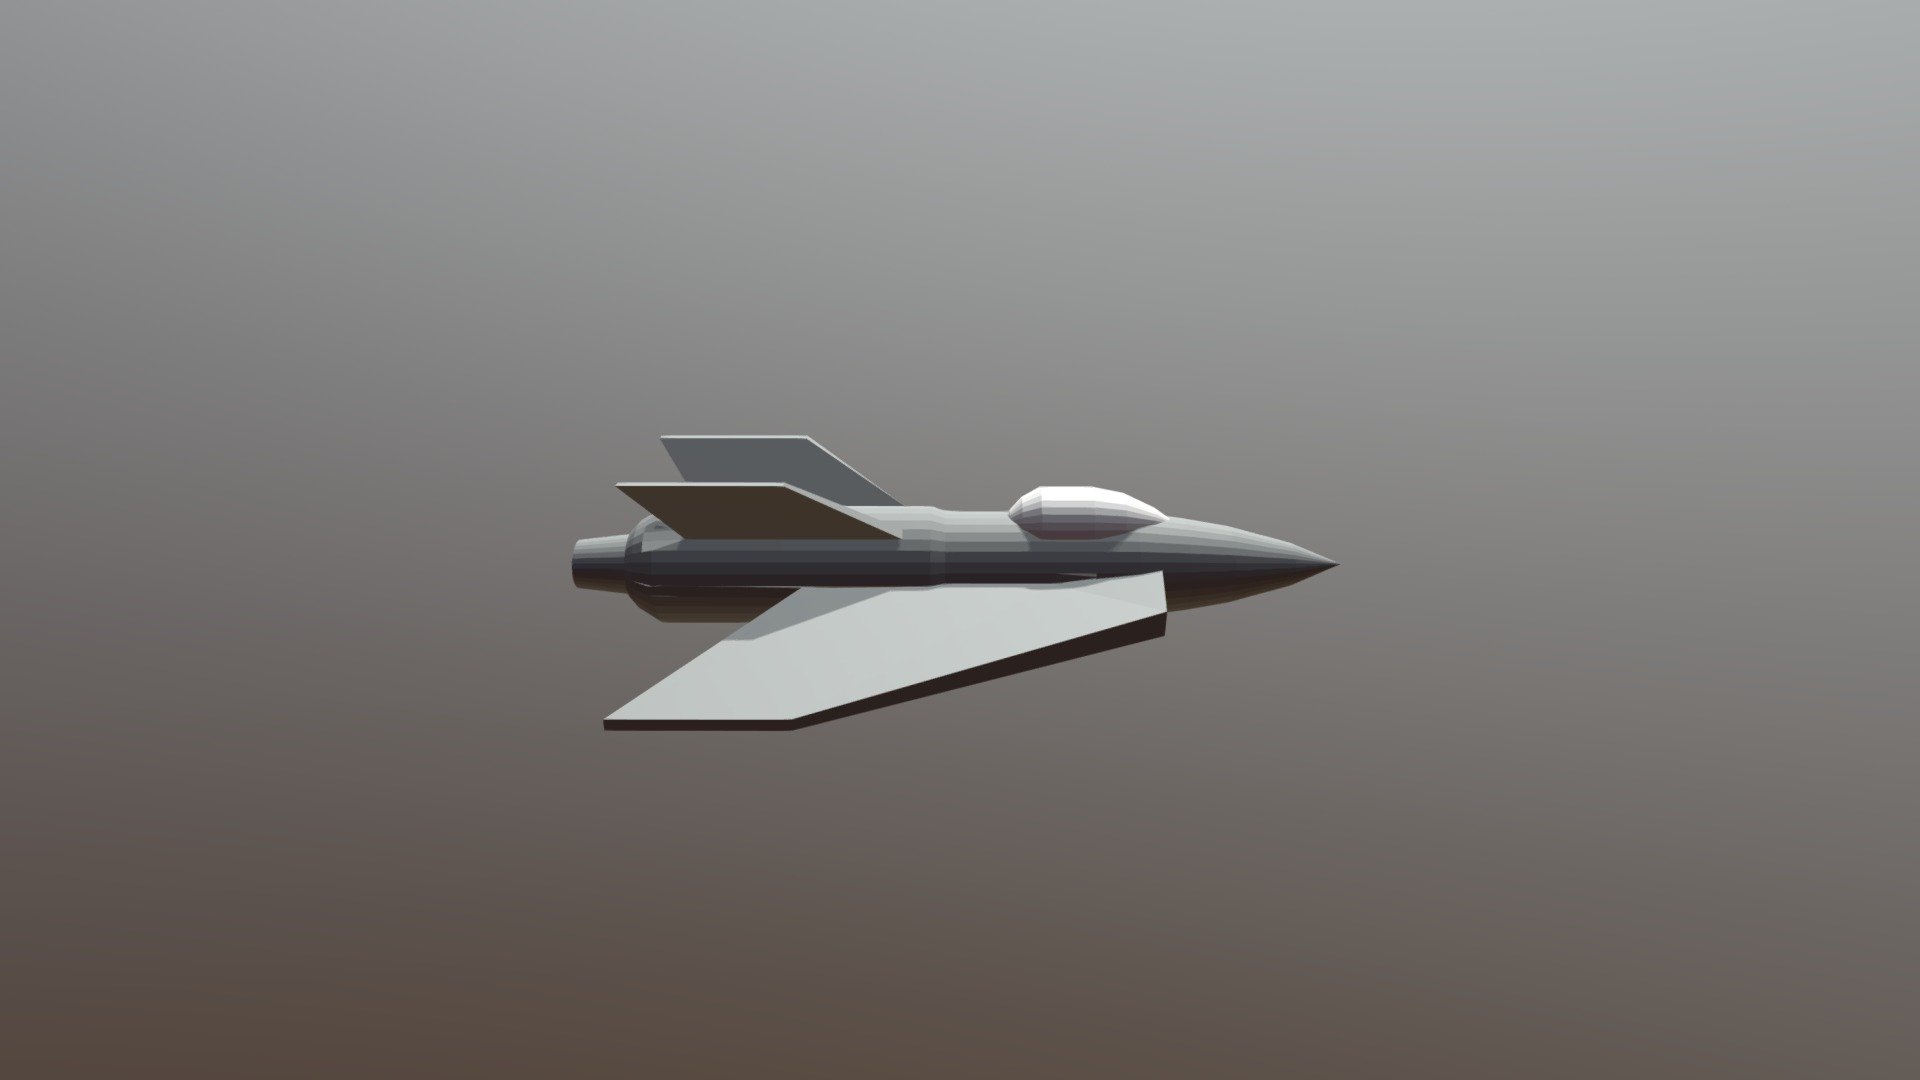 F 40 Concept Fighter Jet Toy 3d Model By Coolkidhector 3c Sketchfab